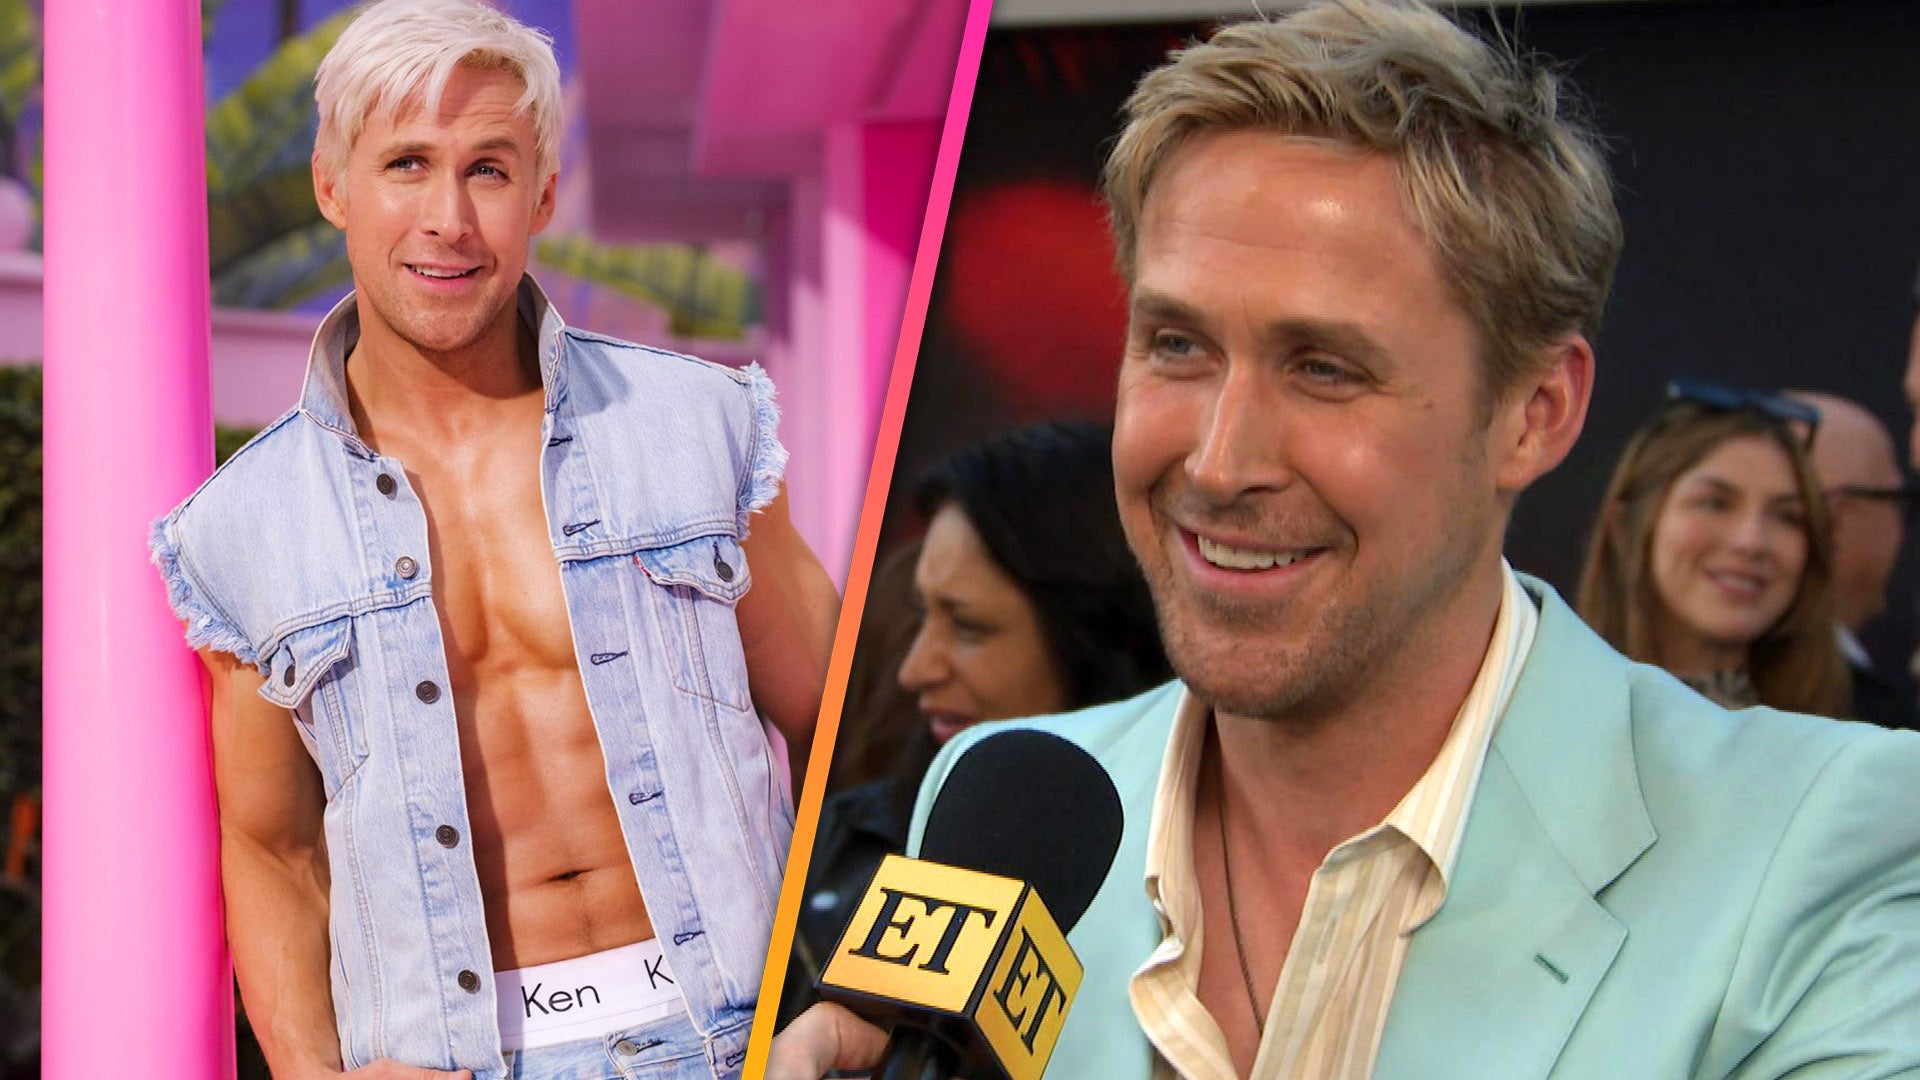 Ryan Gosling Reacts to His 'Barbie' Underwear and 10 Years With Eva Mendes (Exclusive)